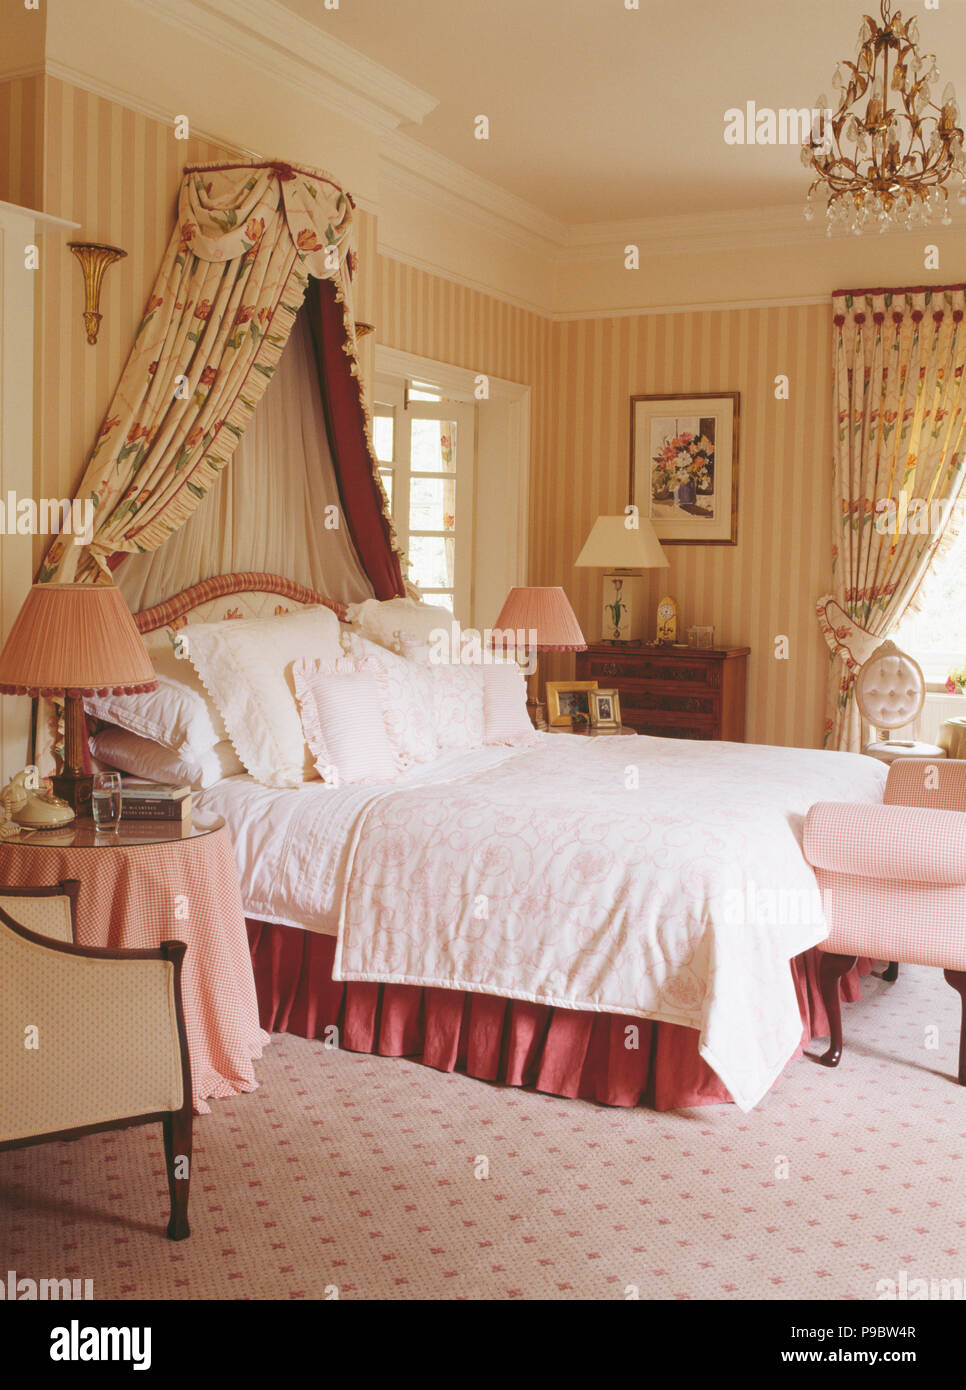 Coronet with floral drapes above bed in country bedroom with striped wallpaper Stock Photo